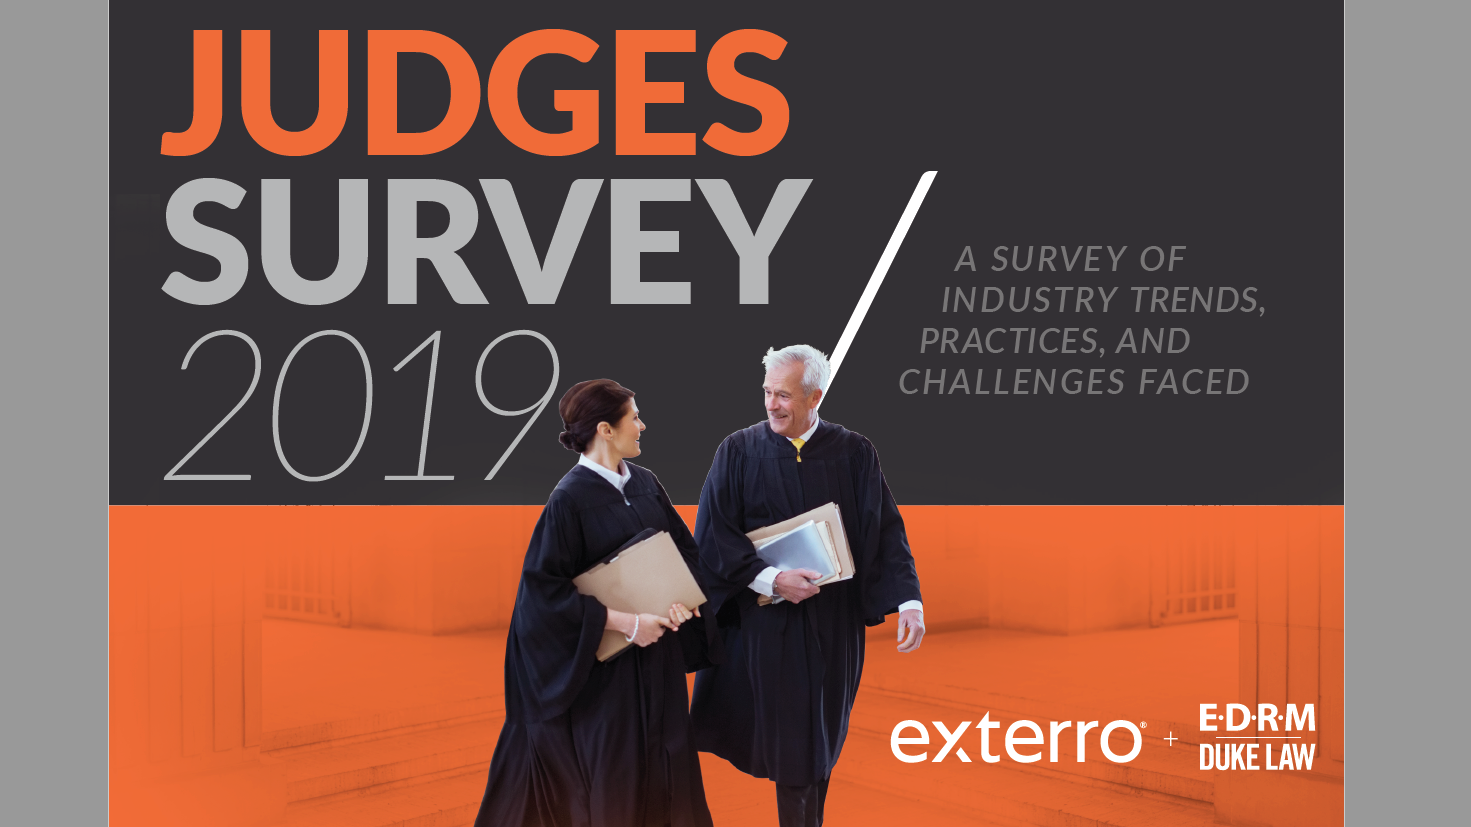 Lawyers&#8217; E-Discovery Competence Improving, Judges in Survey Say